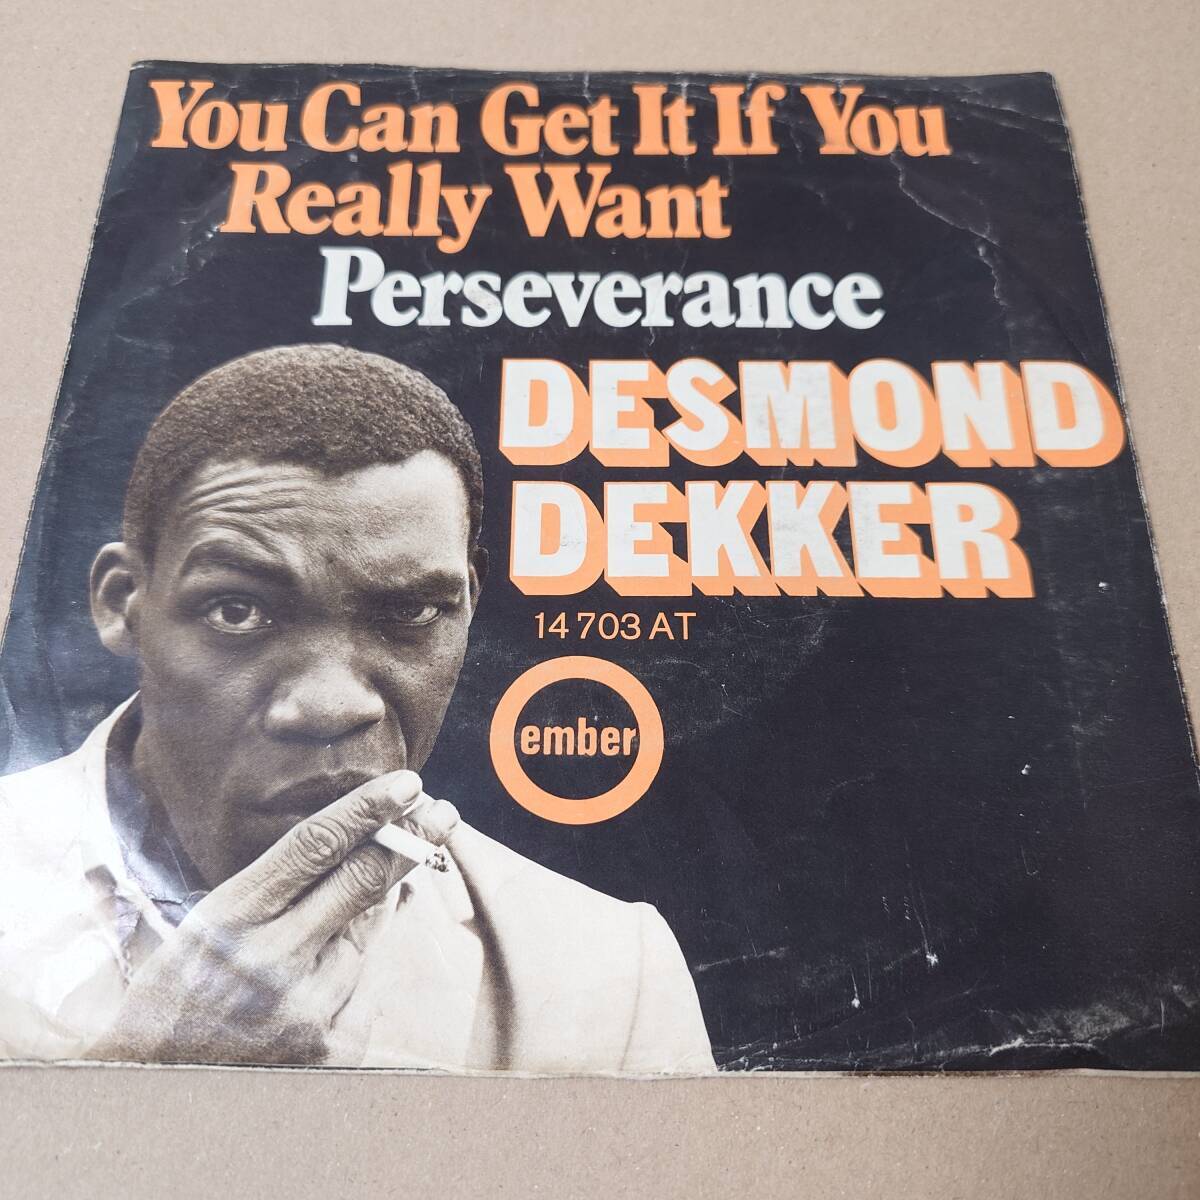 Desmond Dekker - You Can Get It If You Really Want / Perseverance // Ember 7inch / Rocksteady / AA2109の画像1